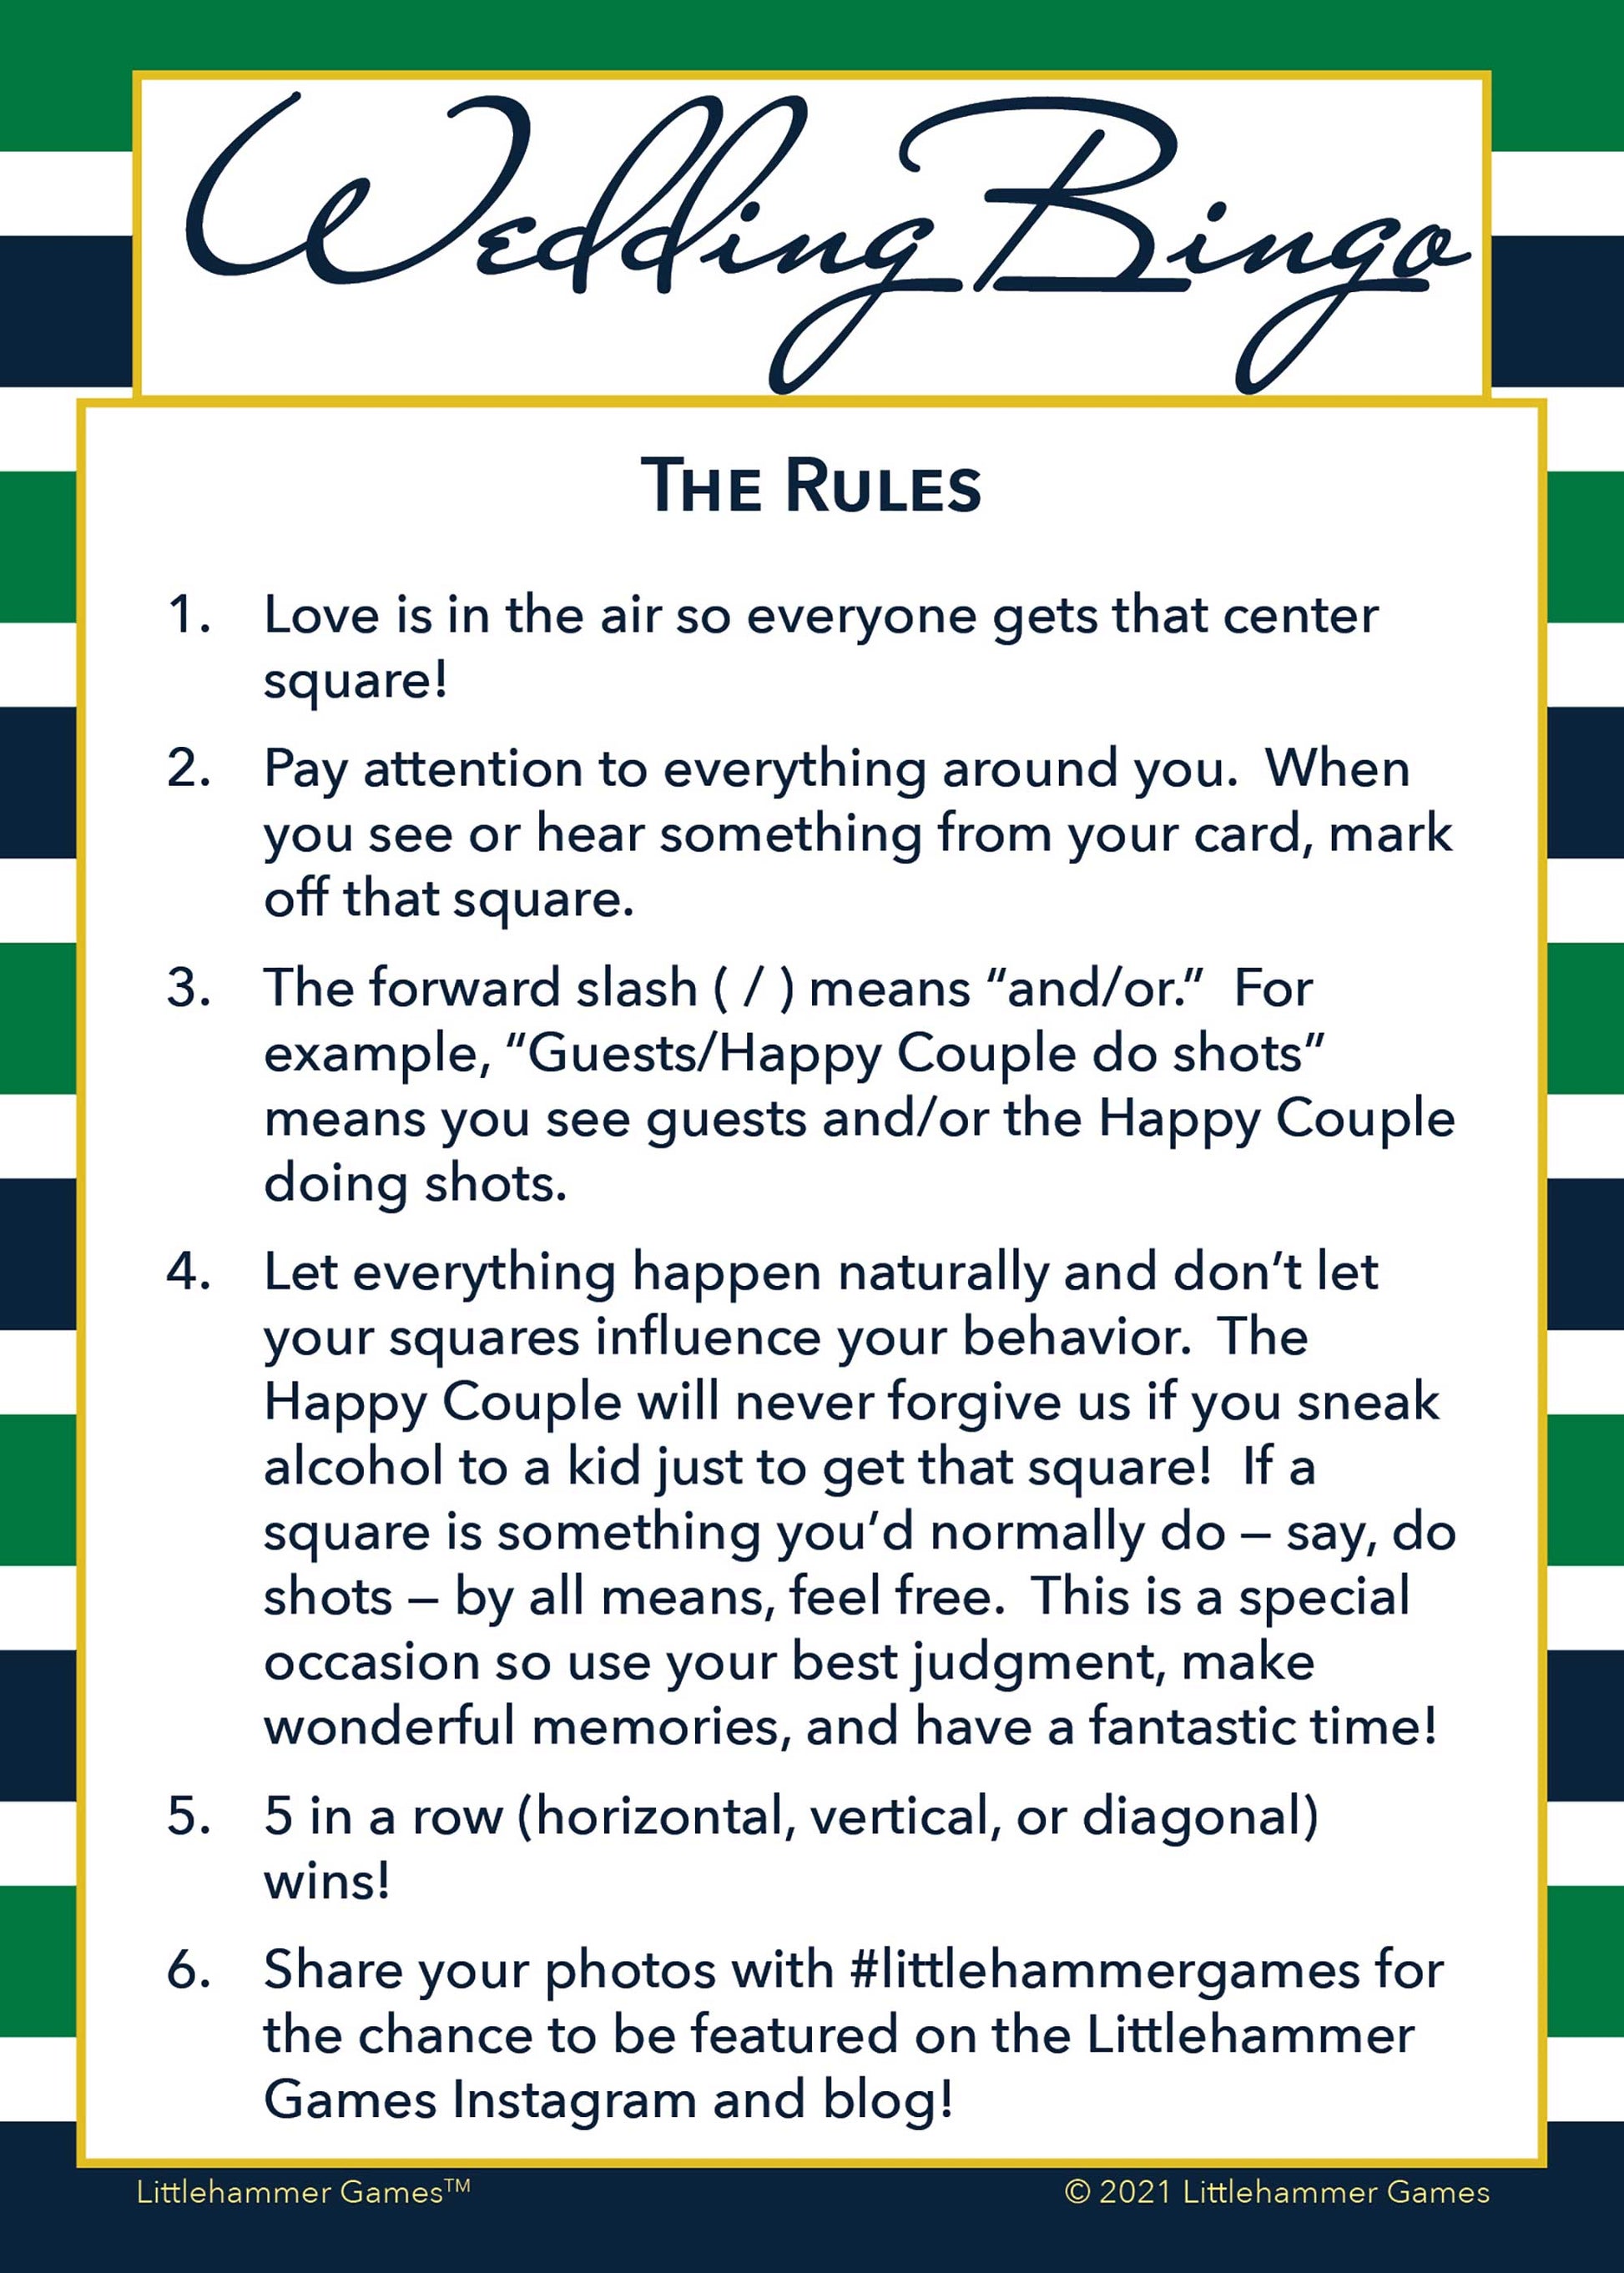 Wedding Bingo rules card on a green and navy-striped background